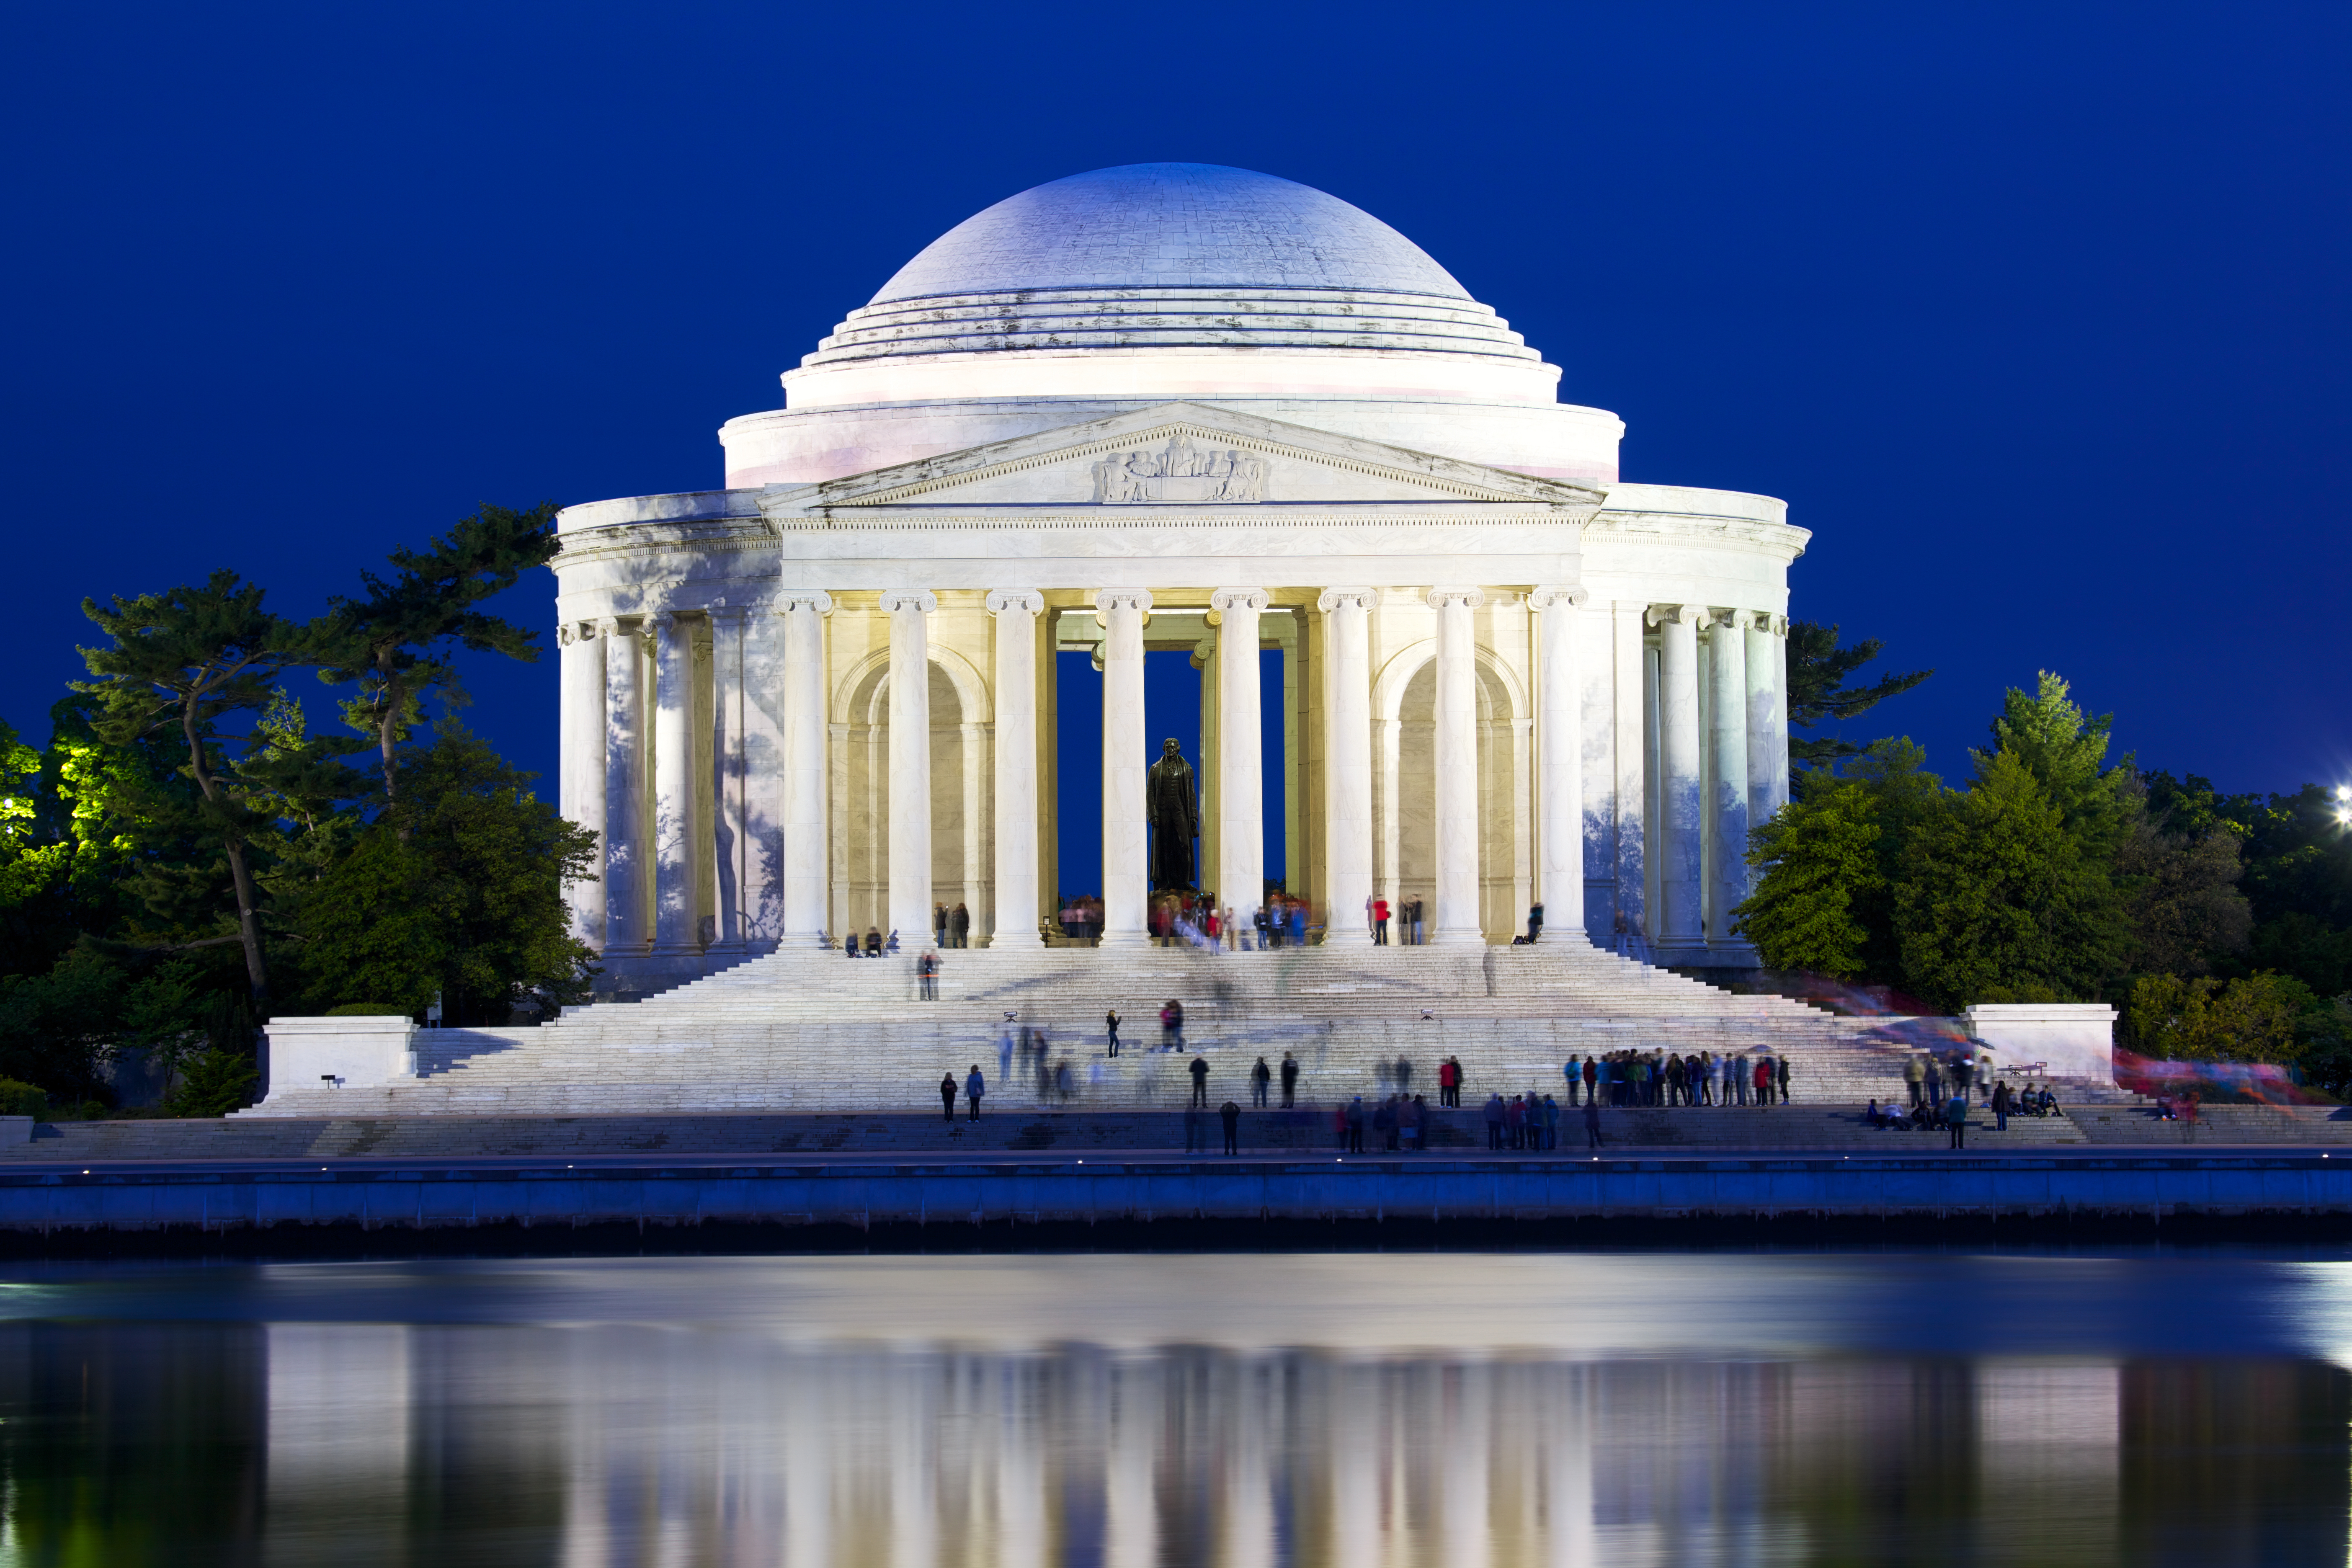 The Jefferson National Memorial at dusk in Washington DC, USA